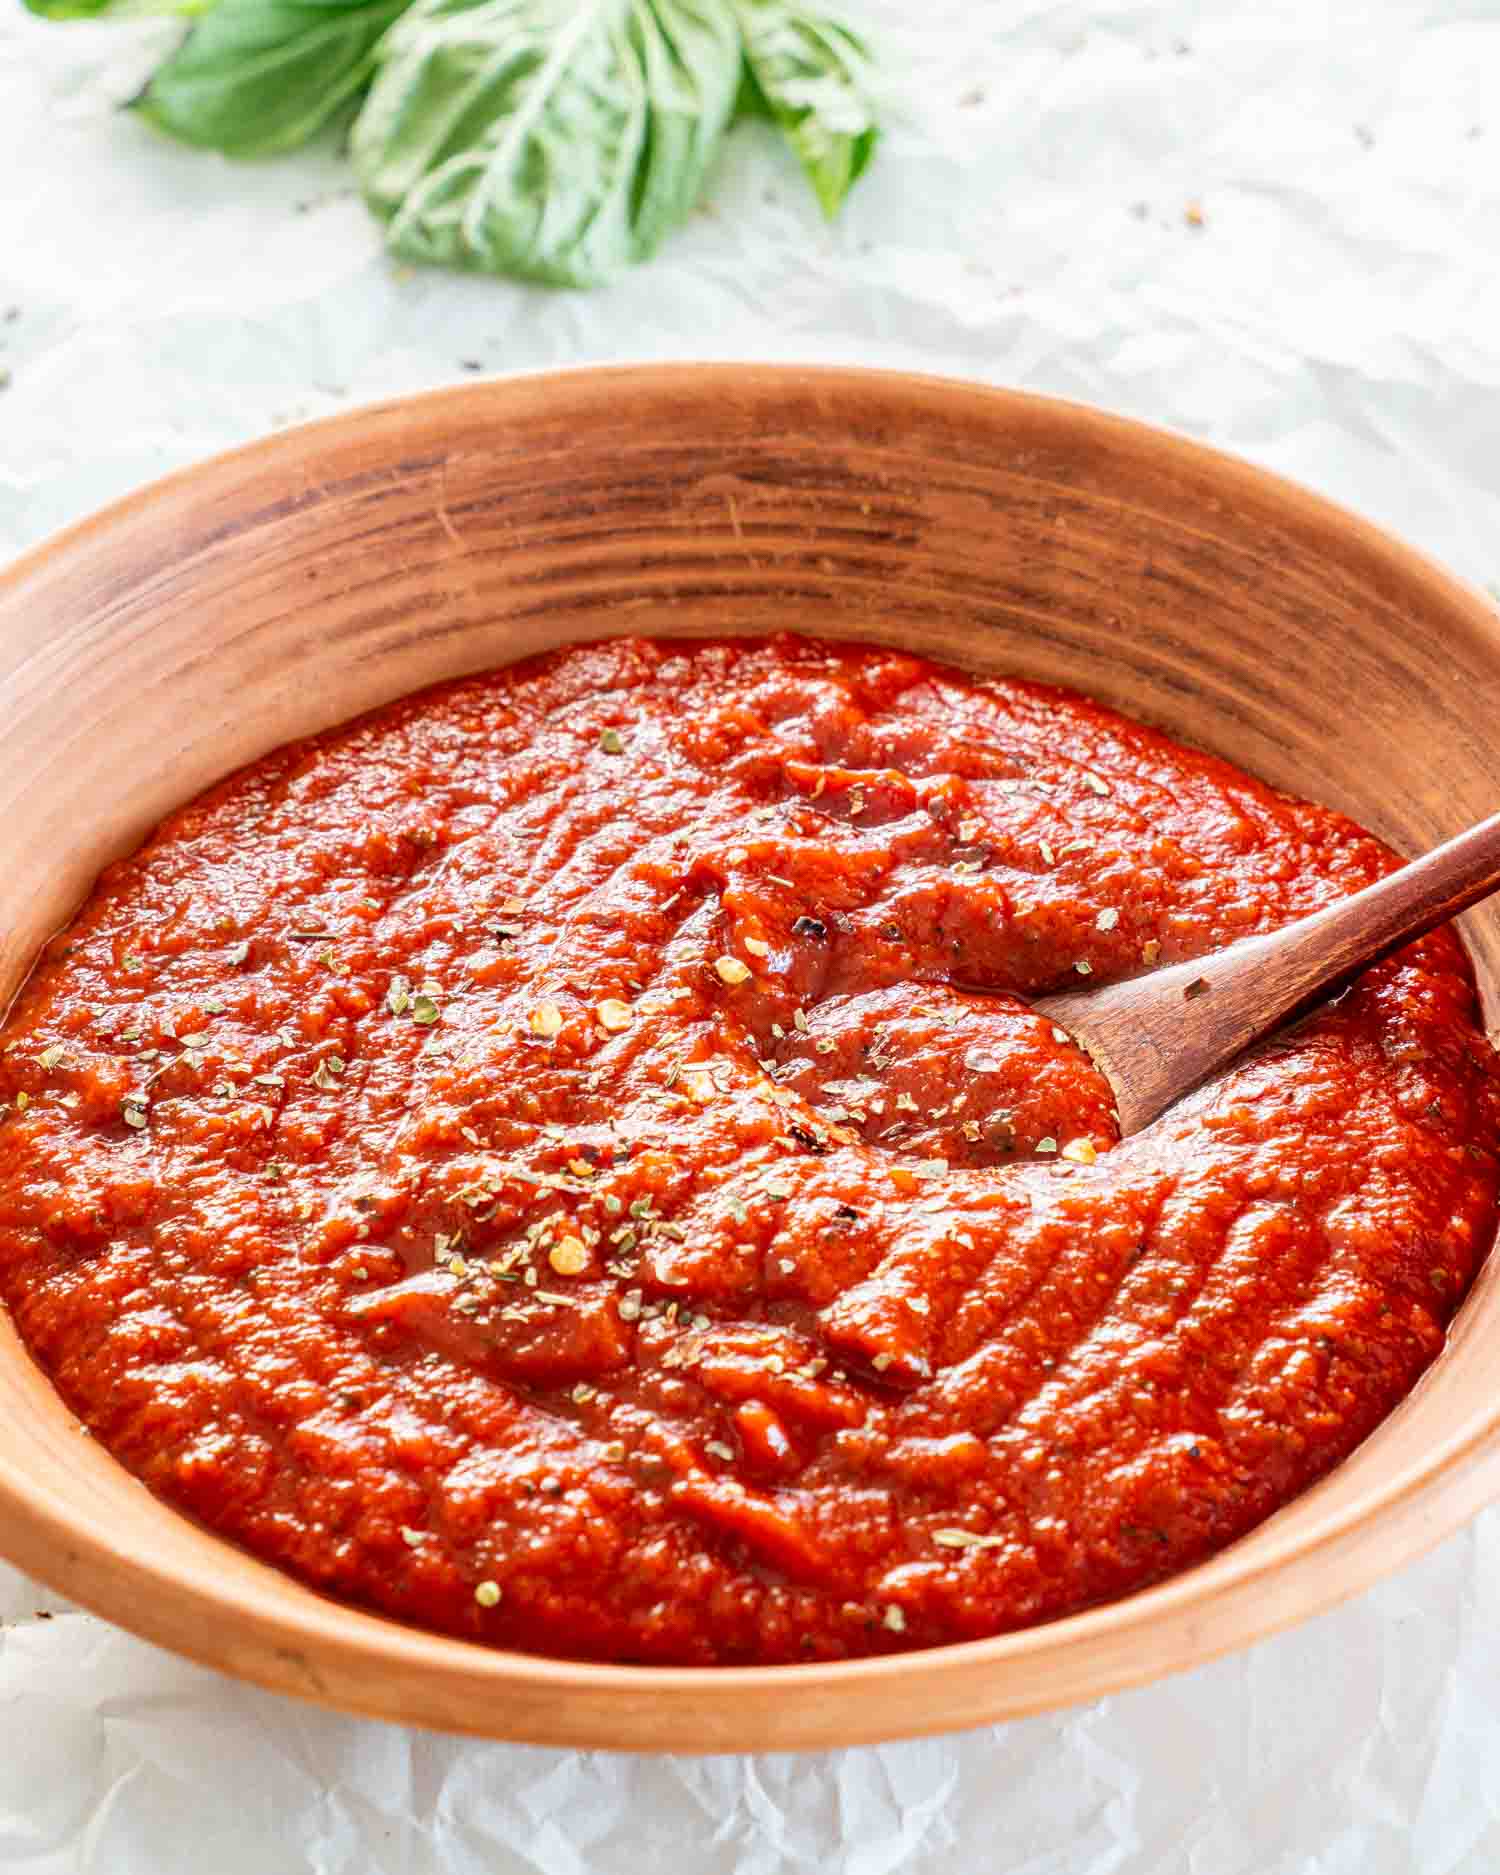 freshly made pizza sauce in a brown clay bowl.